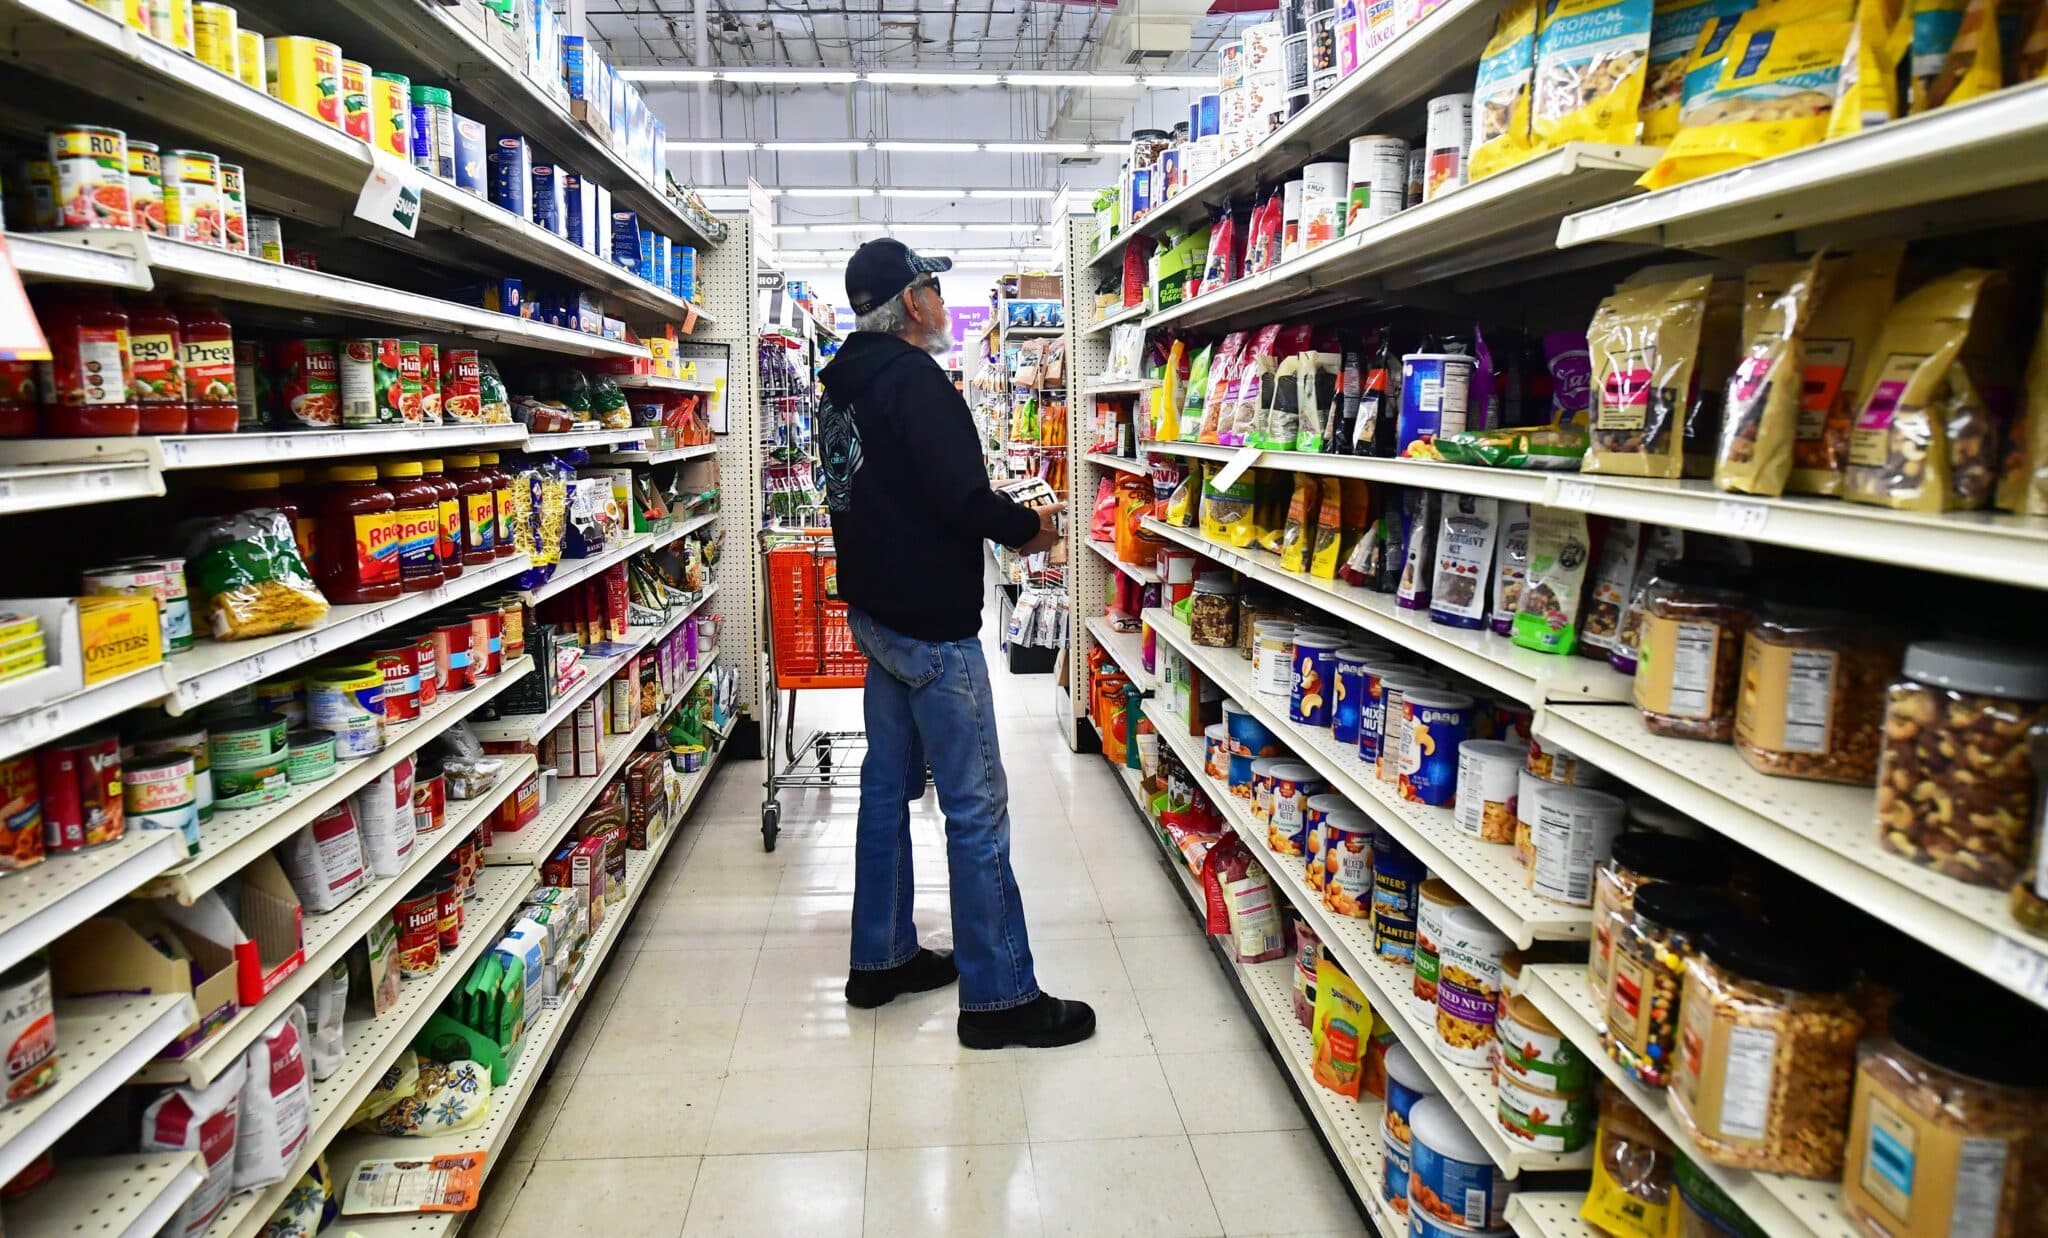 A shopper pauses in the aisle while shopping for food items in Alhambra, California, on April 12, 2022. - Americans paid more for gasoline, food and other essentials last month amid an ongoing wave of record inflation made worse by Russia's invasion of Ukraine, according to government data released Tuesday. (Photo by Frederic J. BROWN / AFP) (Photo by FREDERIC J. BROWN/AFP via Getty Images)